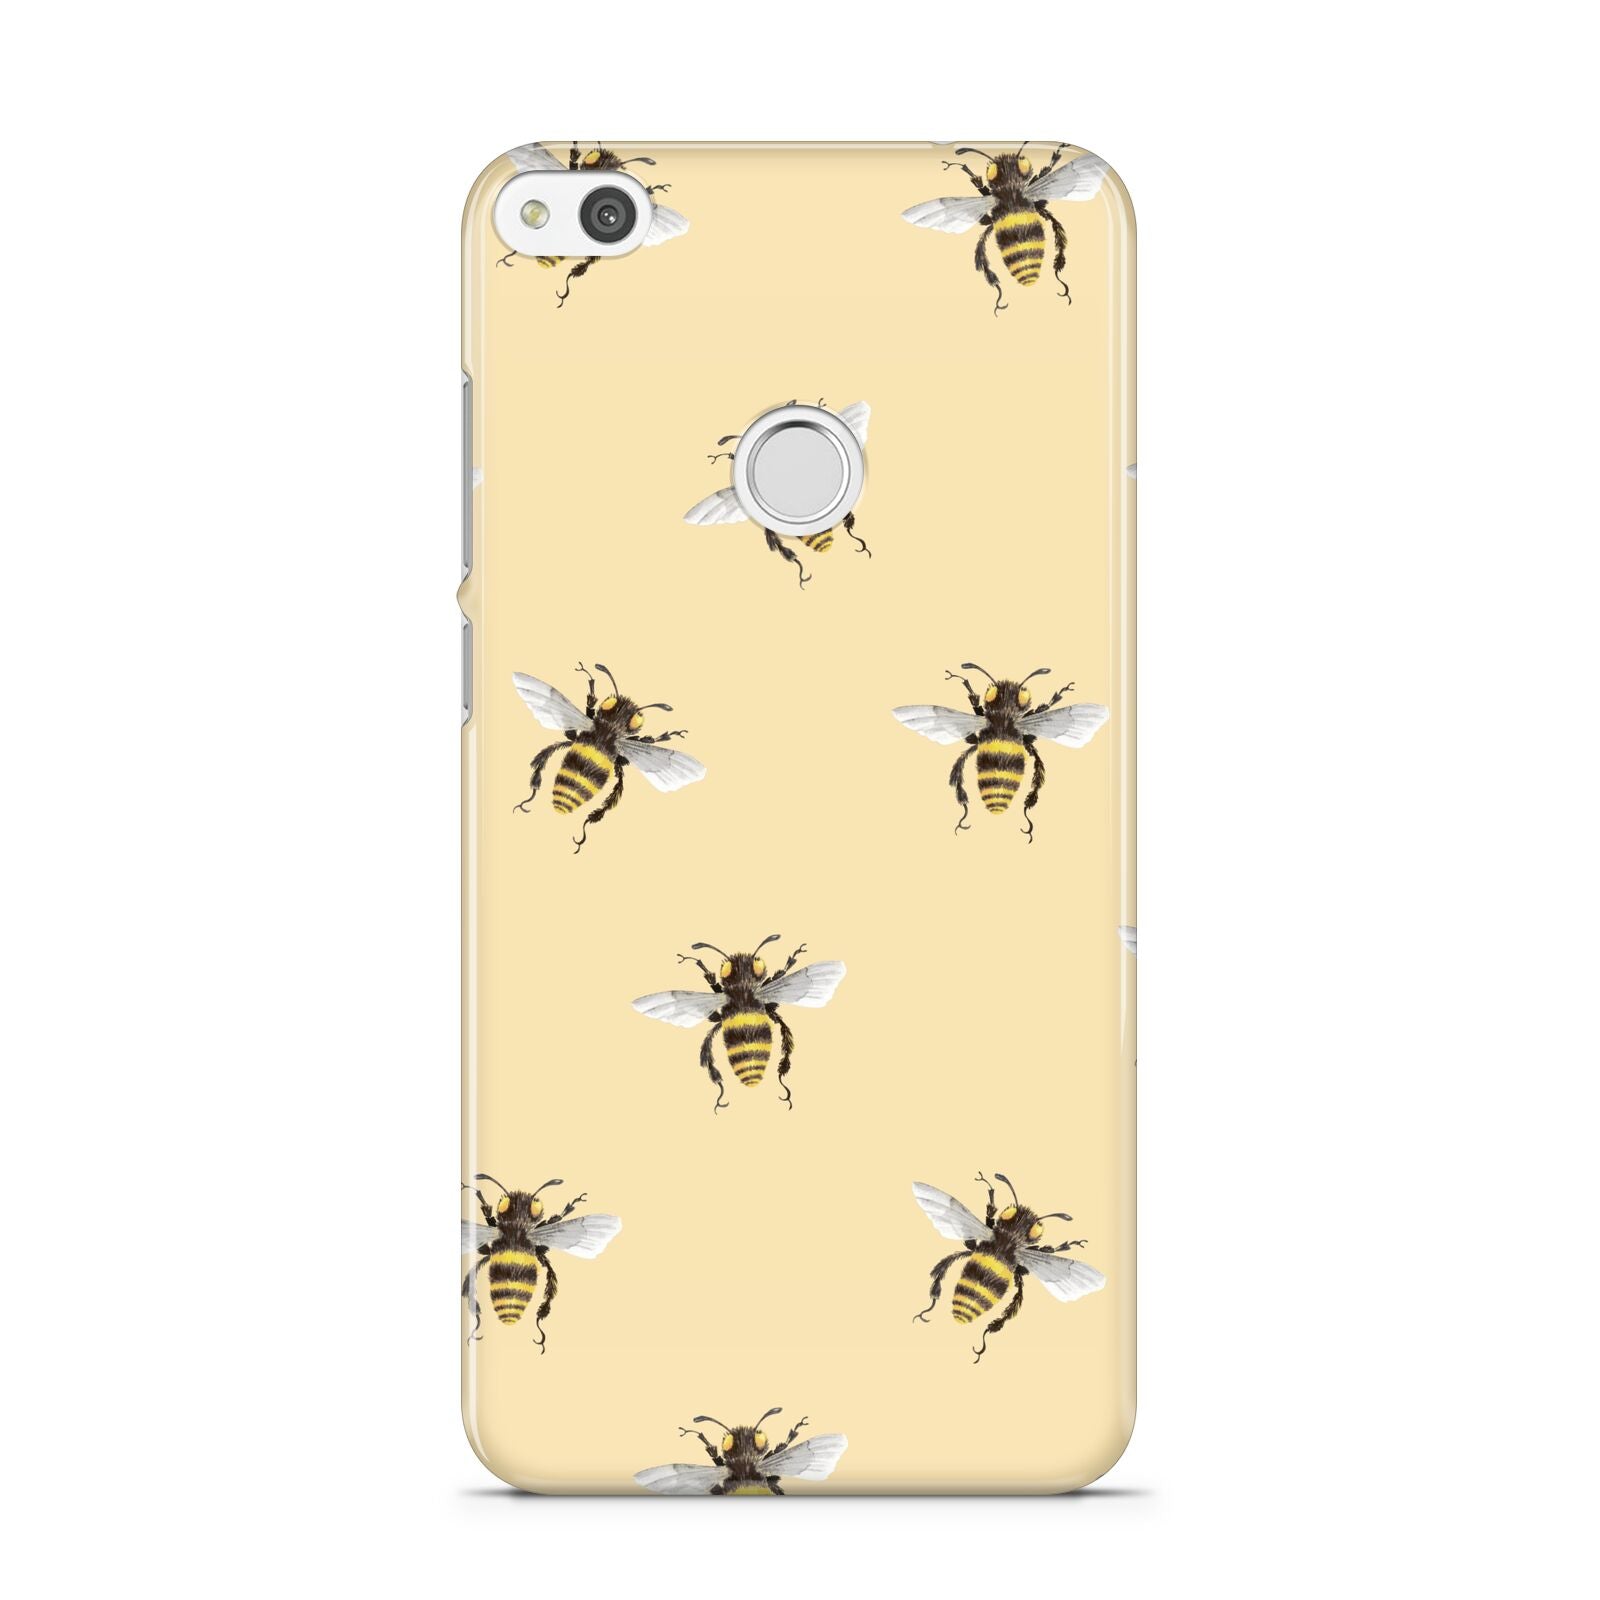 Bee Illustrations Huawei P8 Lite Case